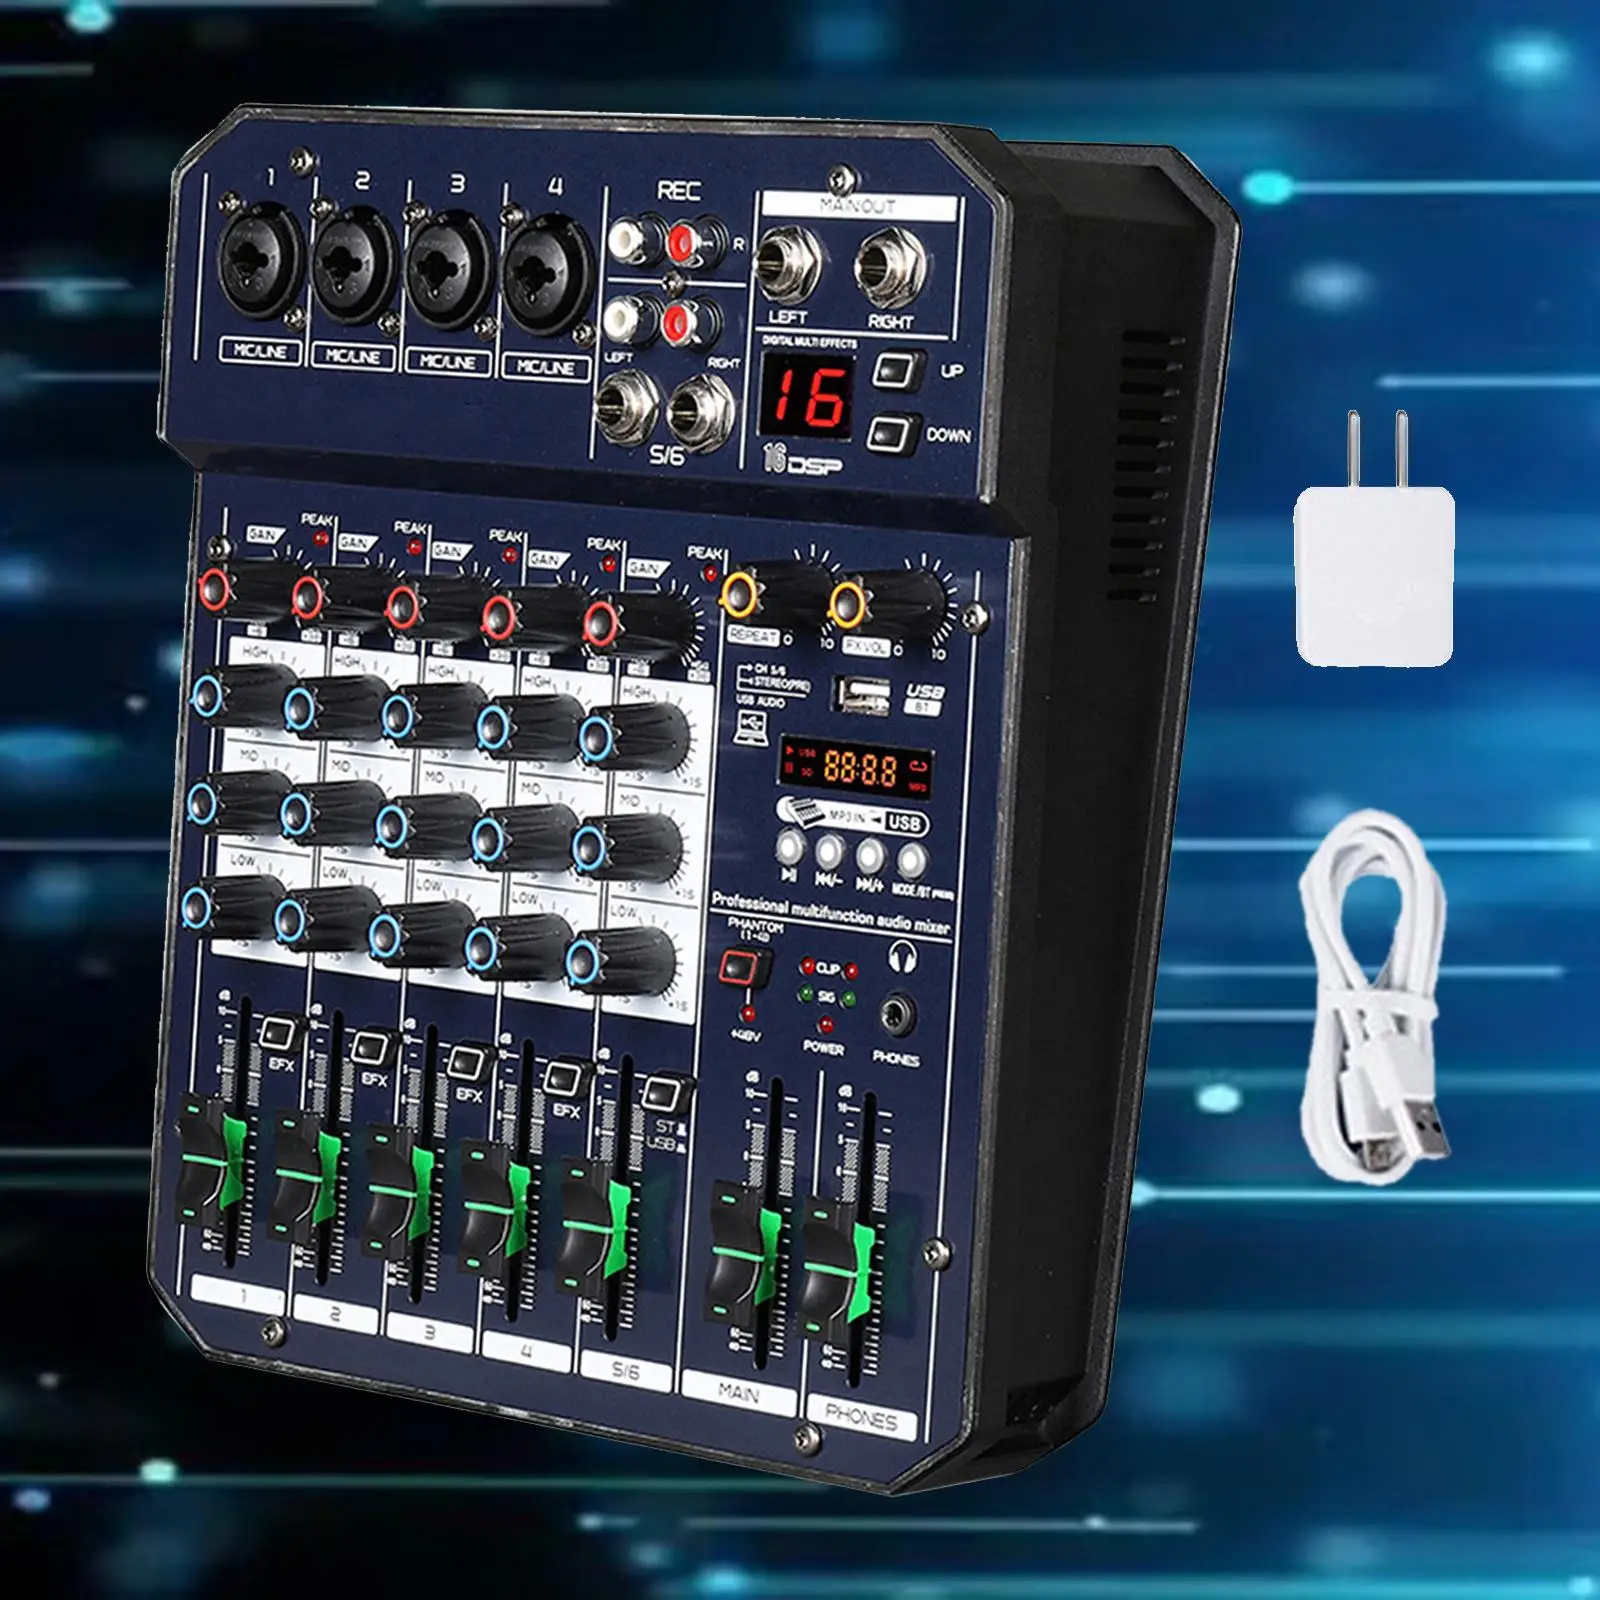 Audio Mixer 48V power Console System Low Noise with 16 Sound Effects Sound Mixer Board for Recording Karaoke DJ